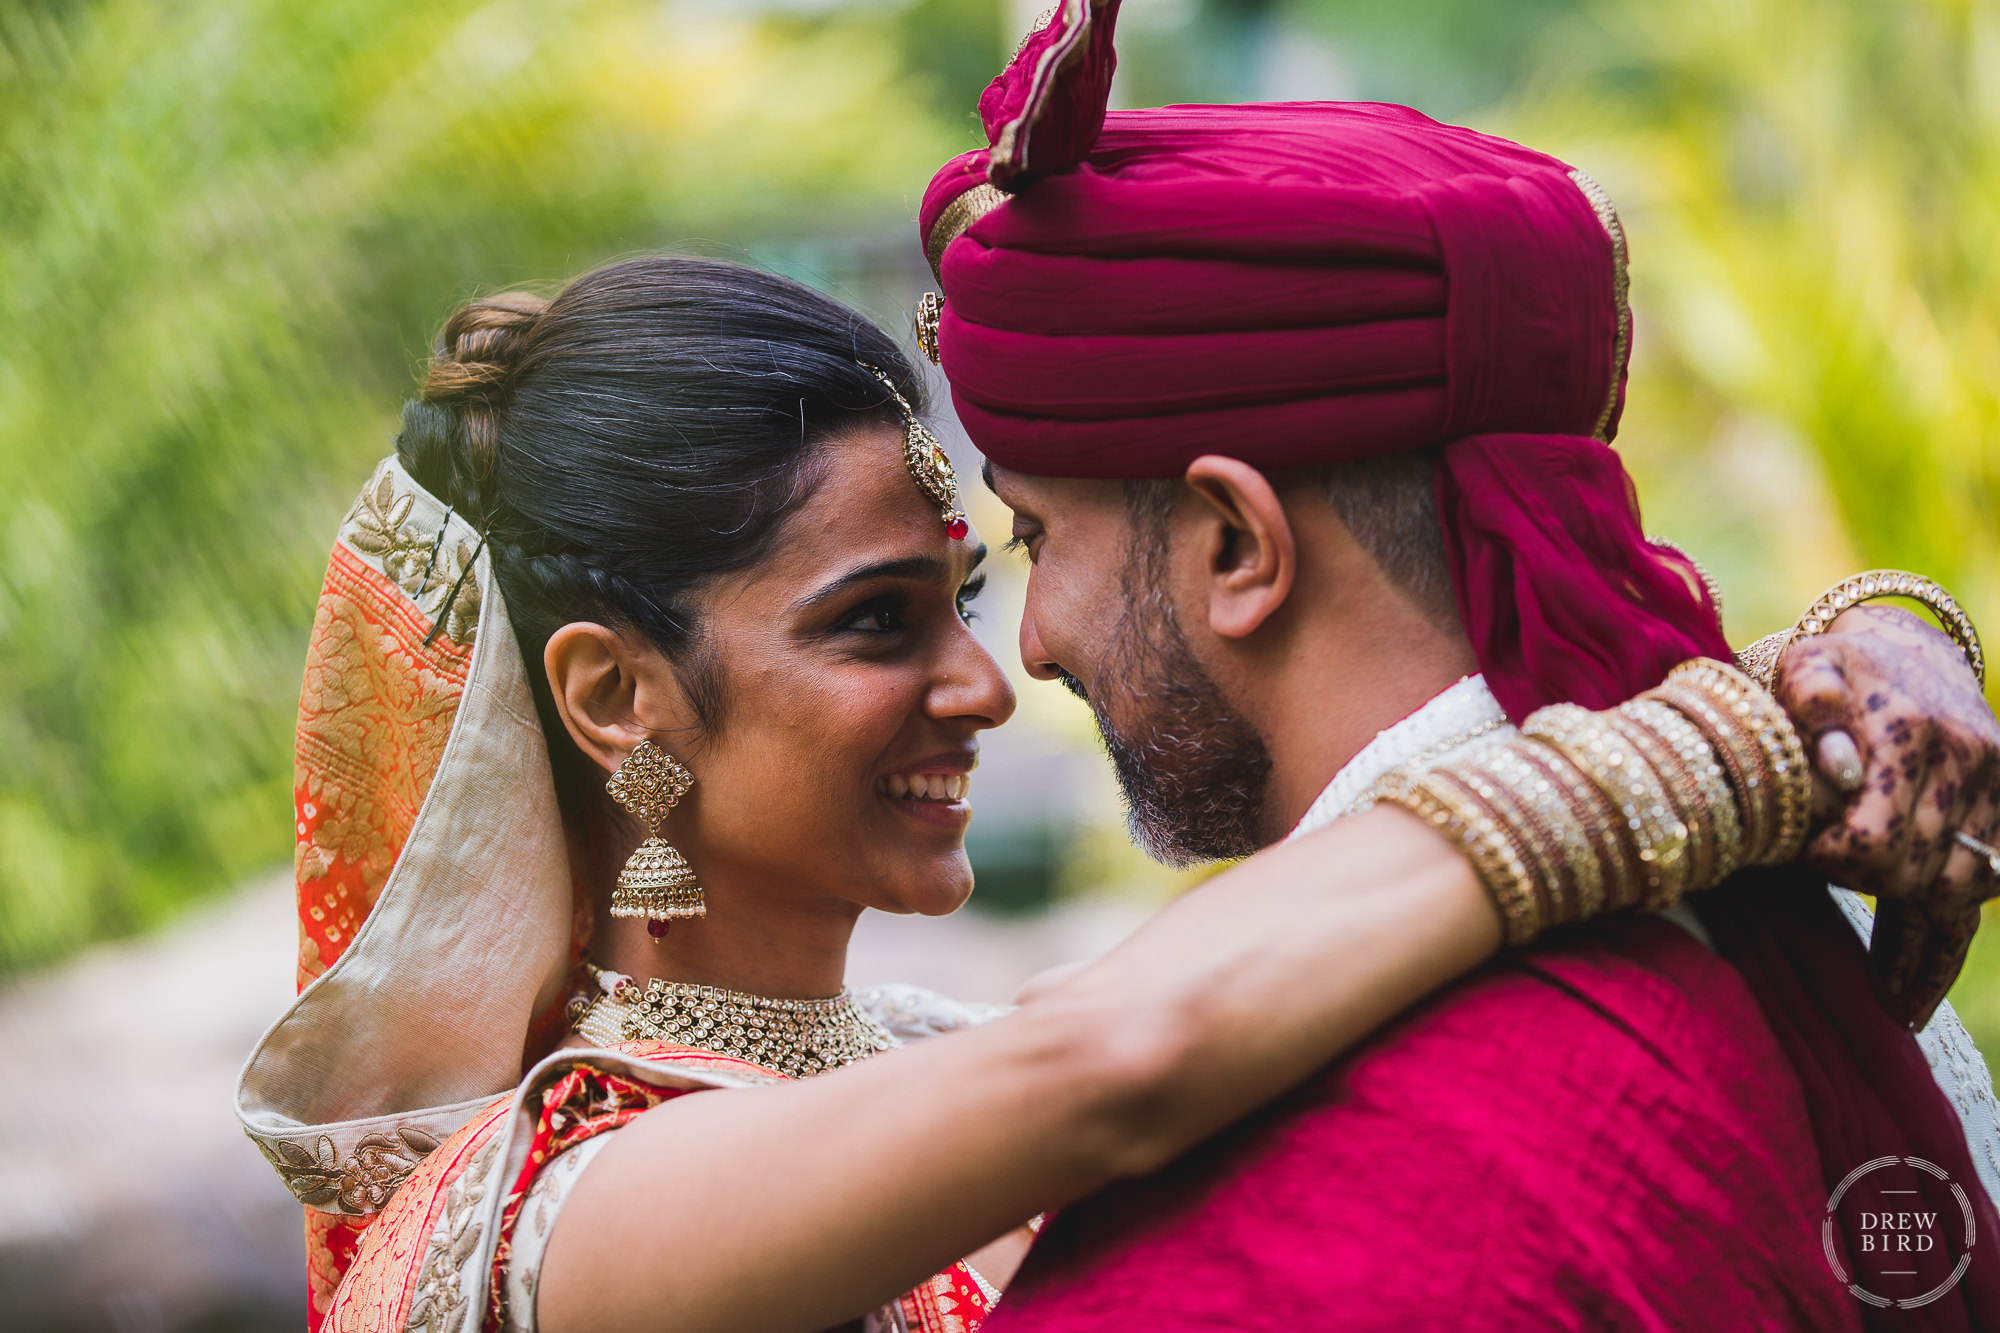 A close up photo of an Indian bride, in full traditional Hindu wedding attire and jewlery and henna painting, with her arms around the groom with their noses almost touching for an Indian wedding photography session on the beach in Aruba.